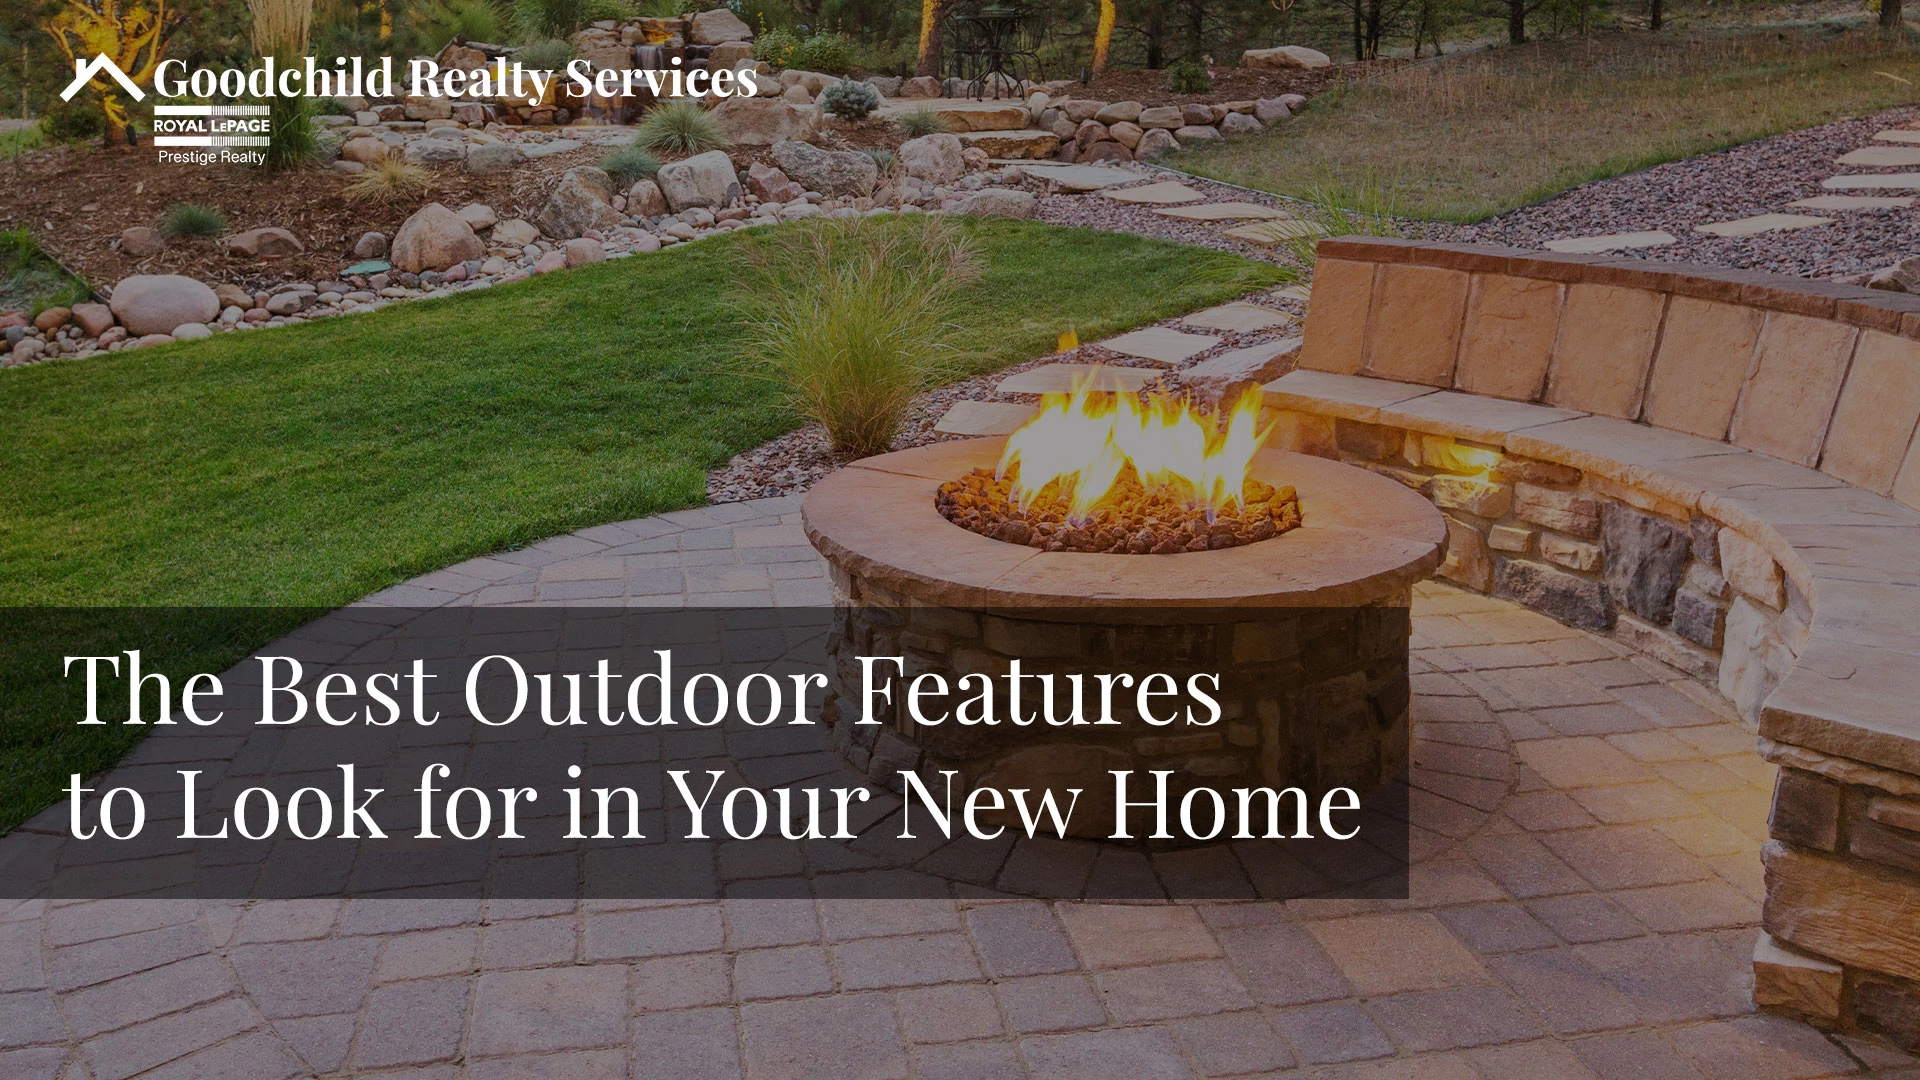 The Best Outdoor Features to Look for in Your New Home